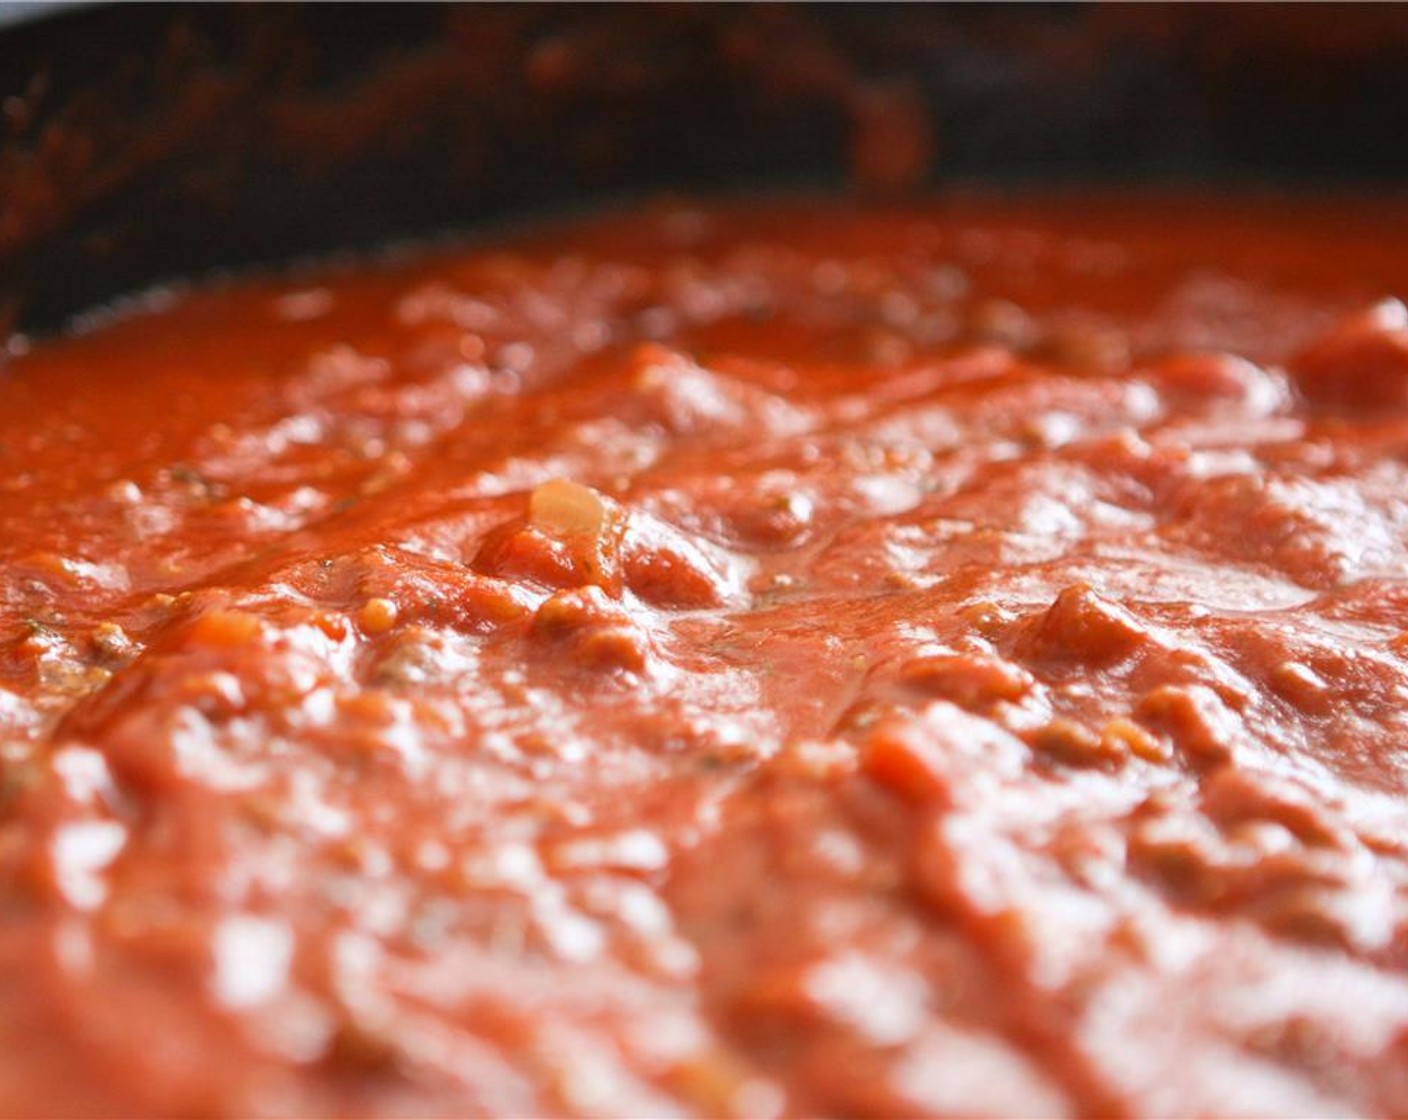 step 4 Add Pasta Sauce (2 jars) and simmer for 15 minutes. During this time, preheat the oven to 350 degrees F (180 degrees C) and coat a 9x13-inch baking dish with cooking spray.